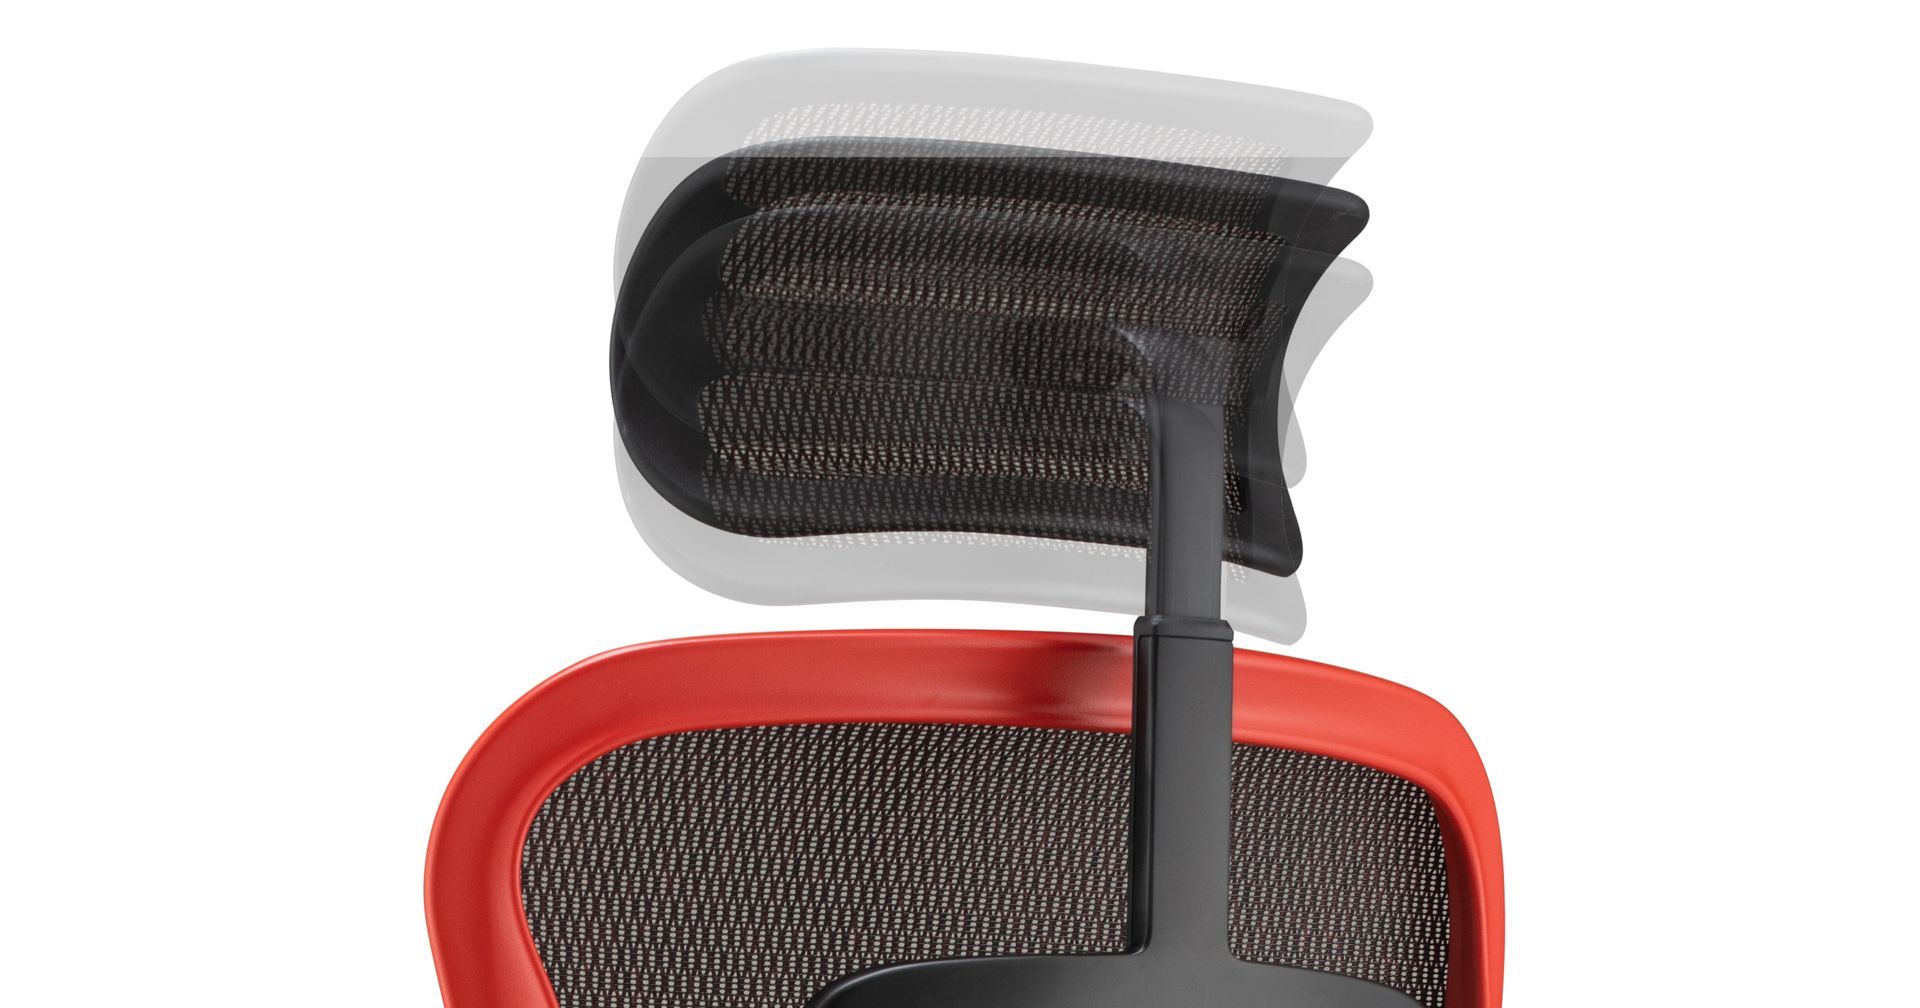 Back-side view of the Enjoy Ultra gaming chair headrest, highlighting height adjustment